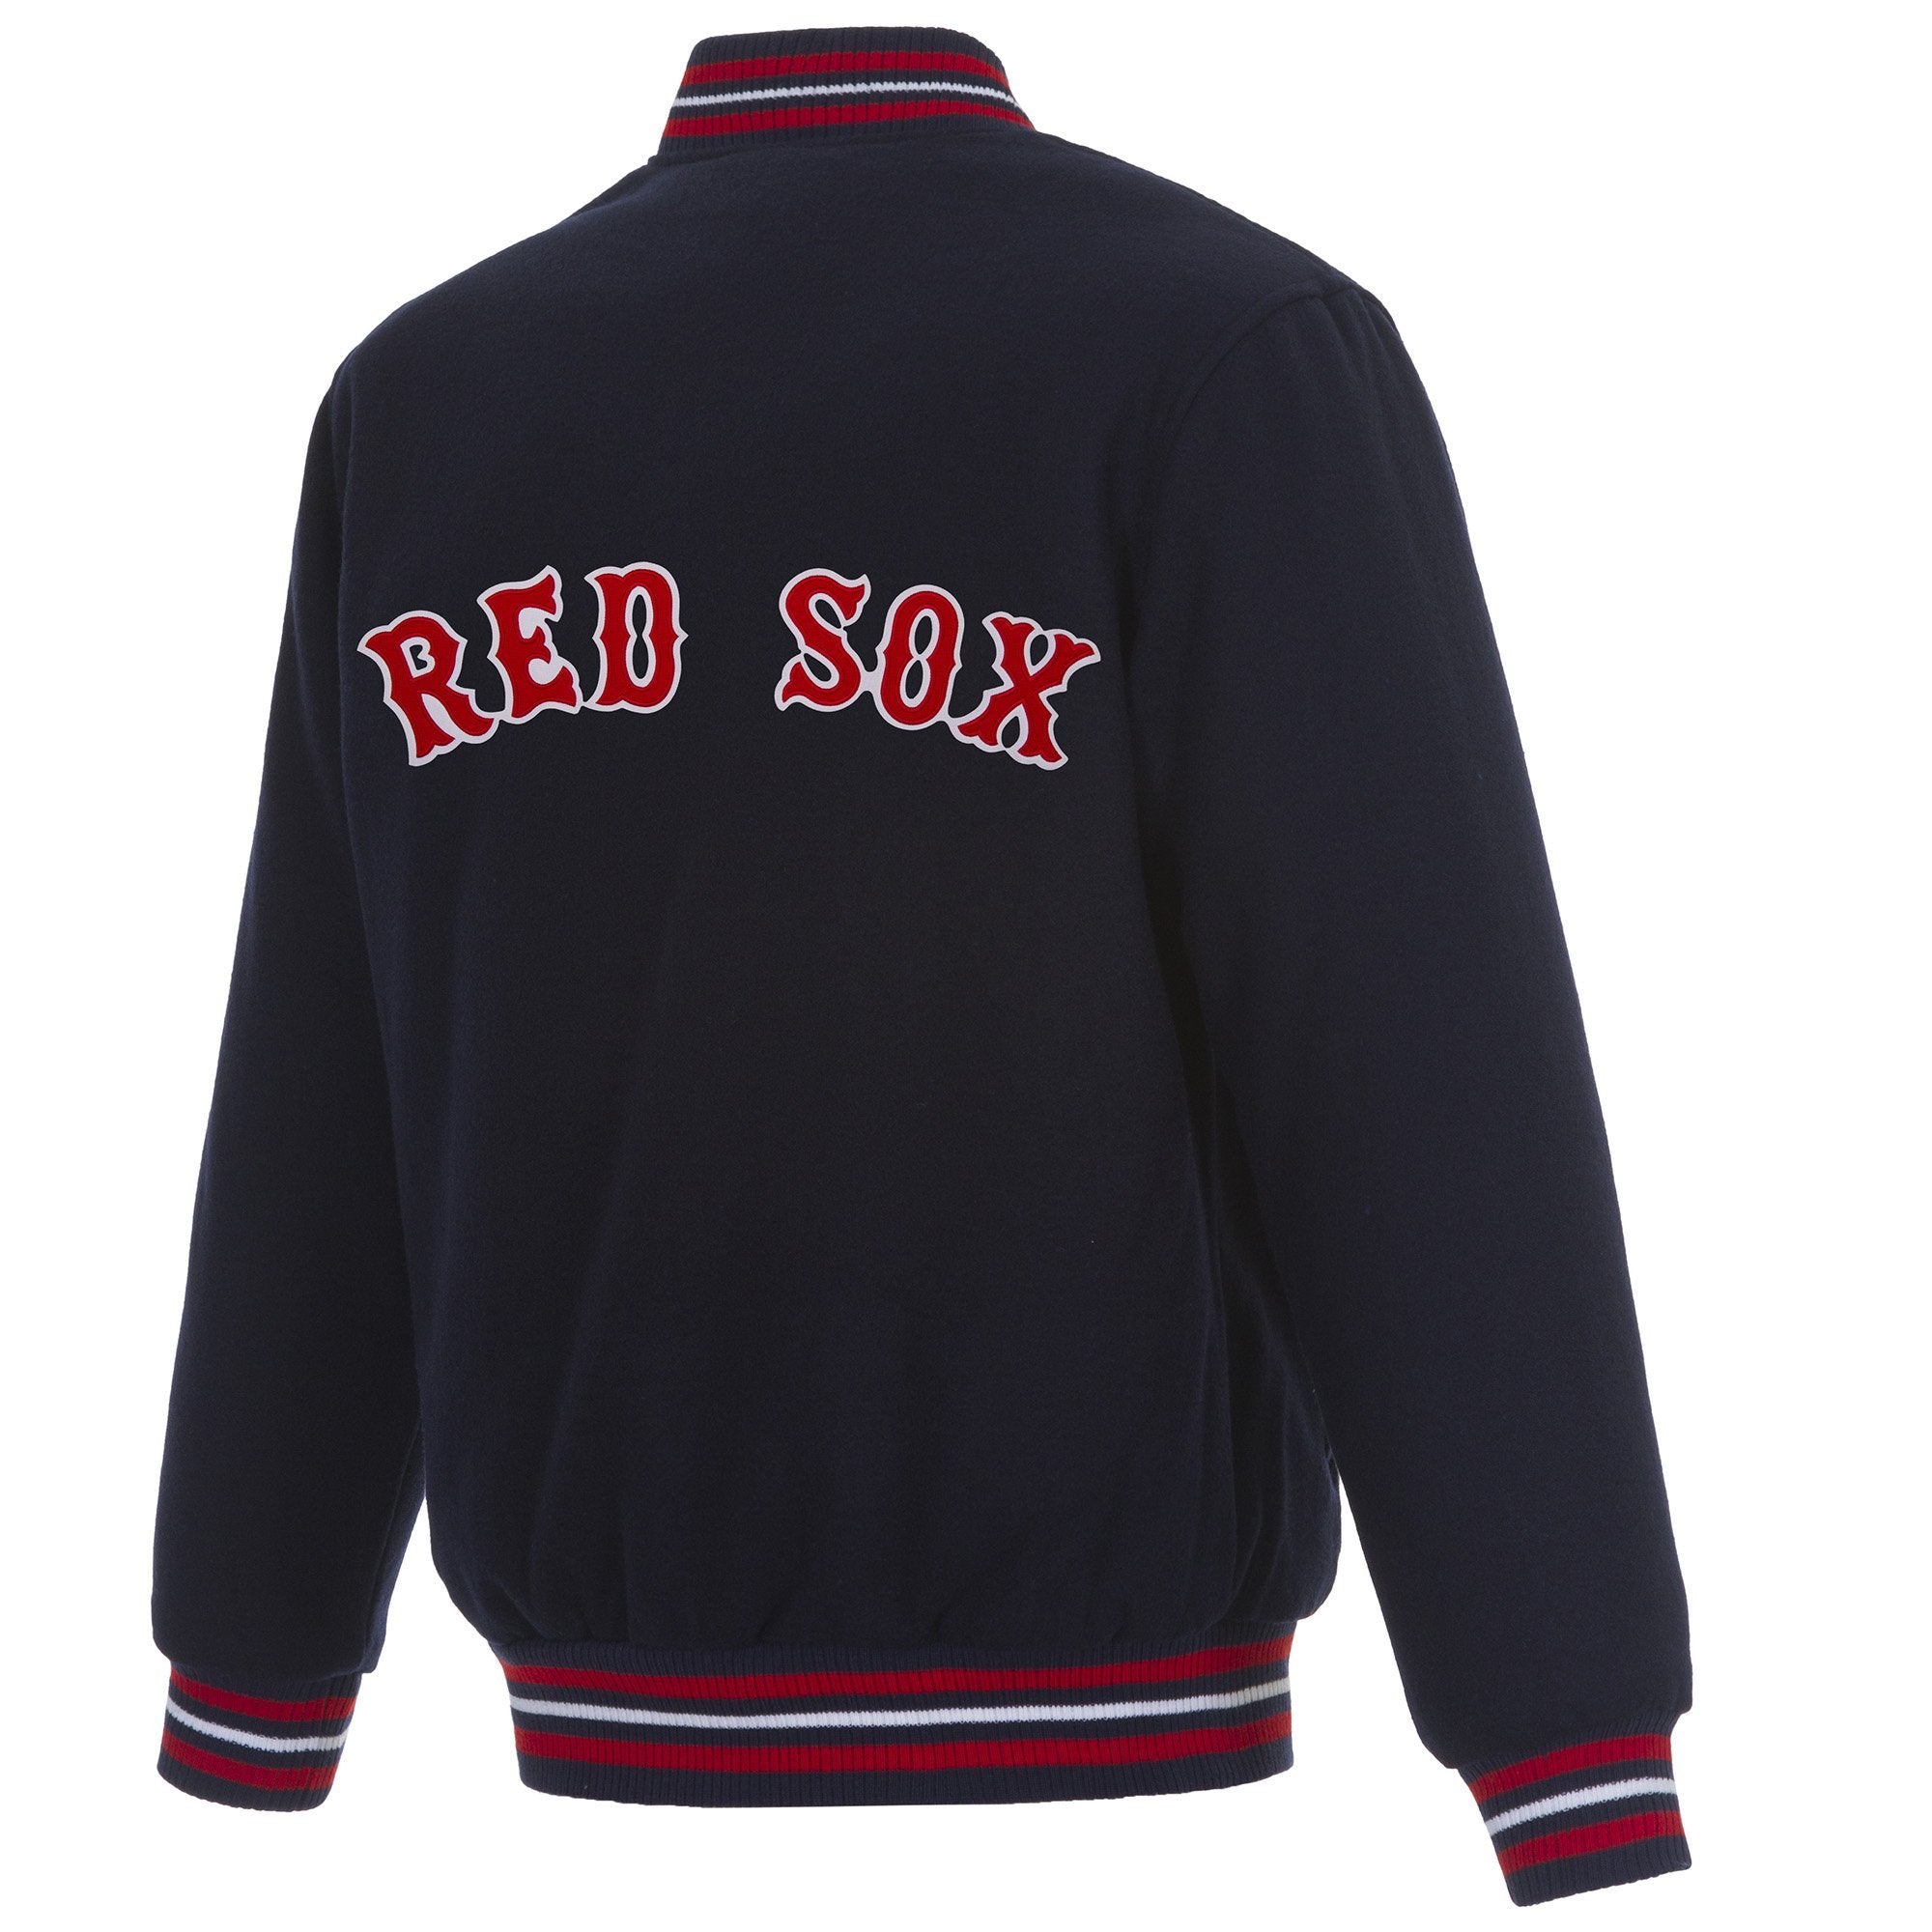 BOSTON RED SOX REVERSIBLE WOOL JACKET - NAVY – Retired NFL Players ...